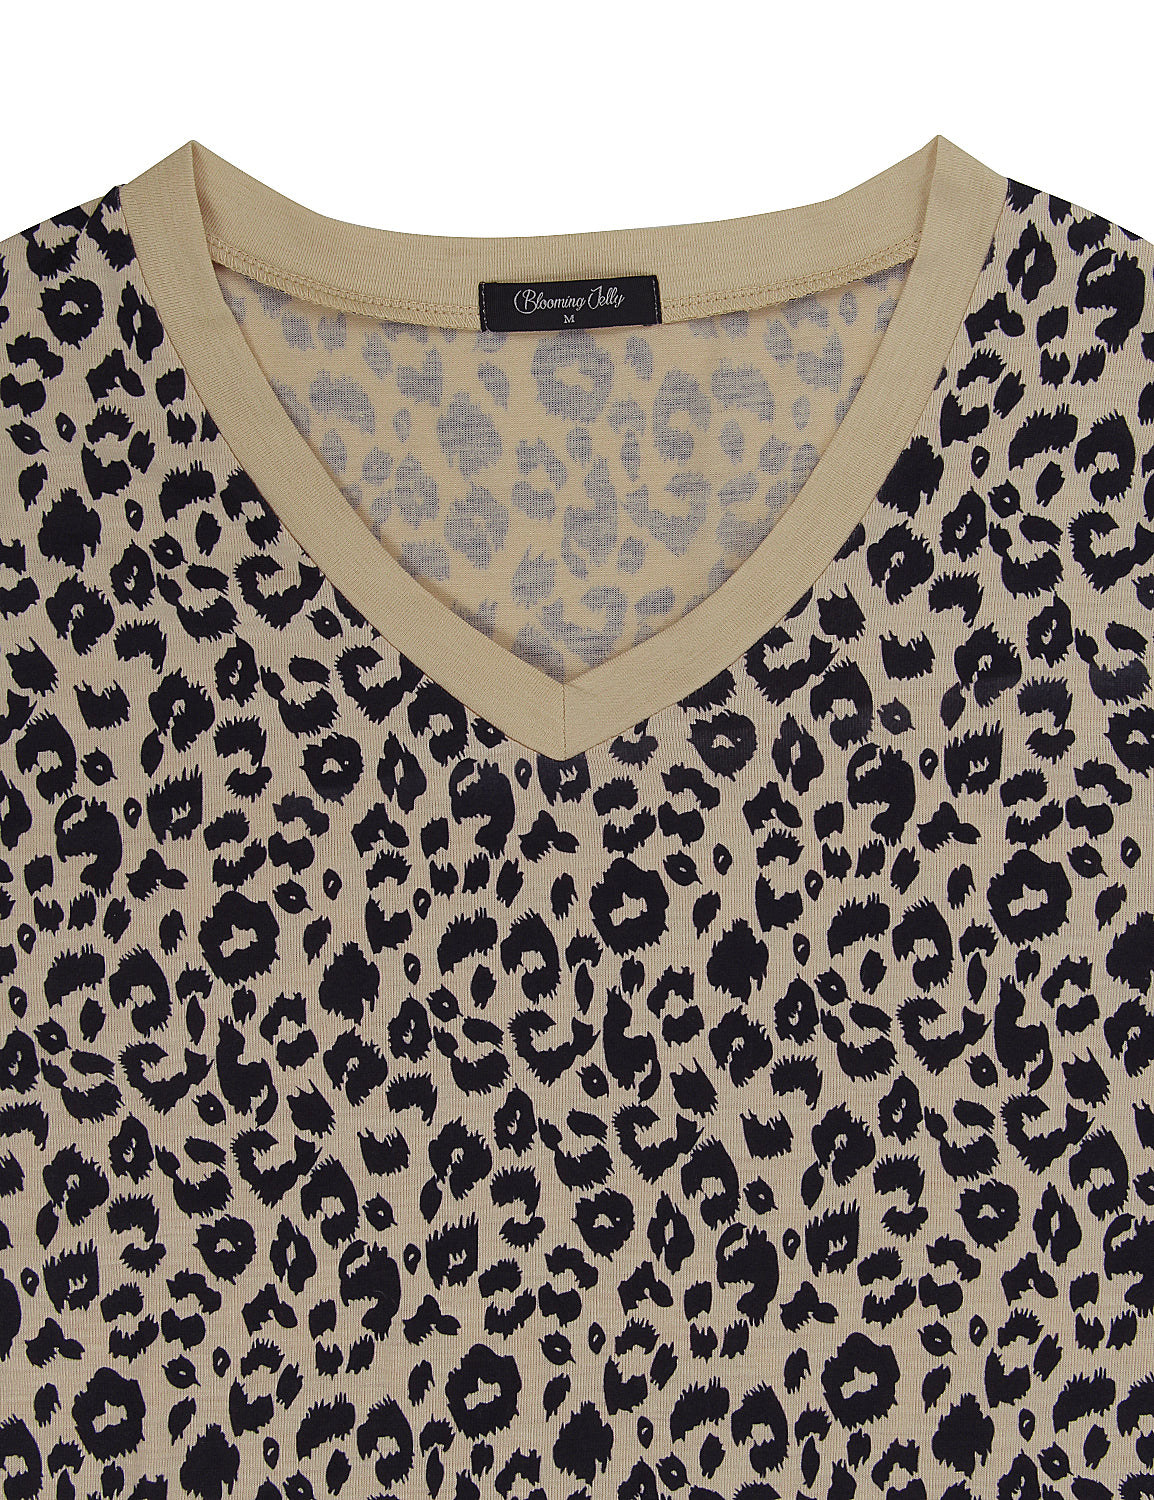 Leopard Print V Neck Long Sleeve T-Shirt - Blooming Jelly